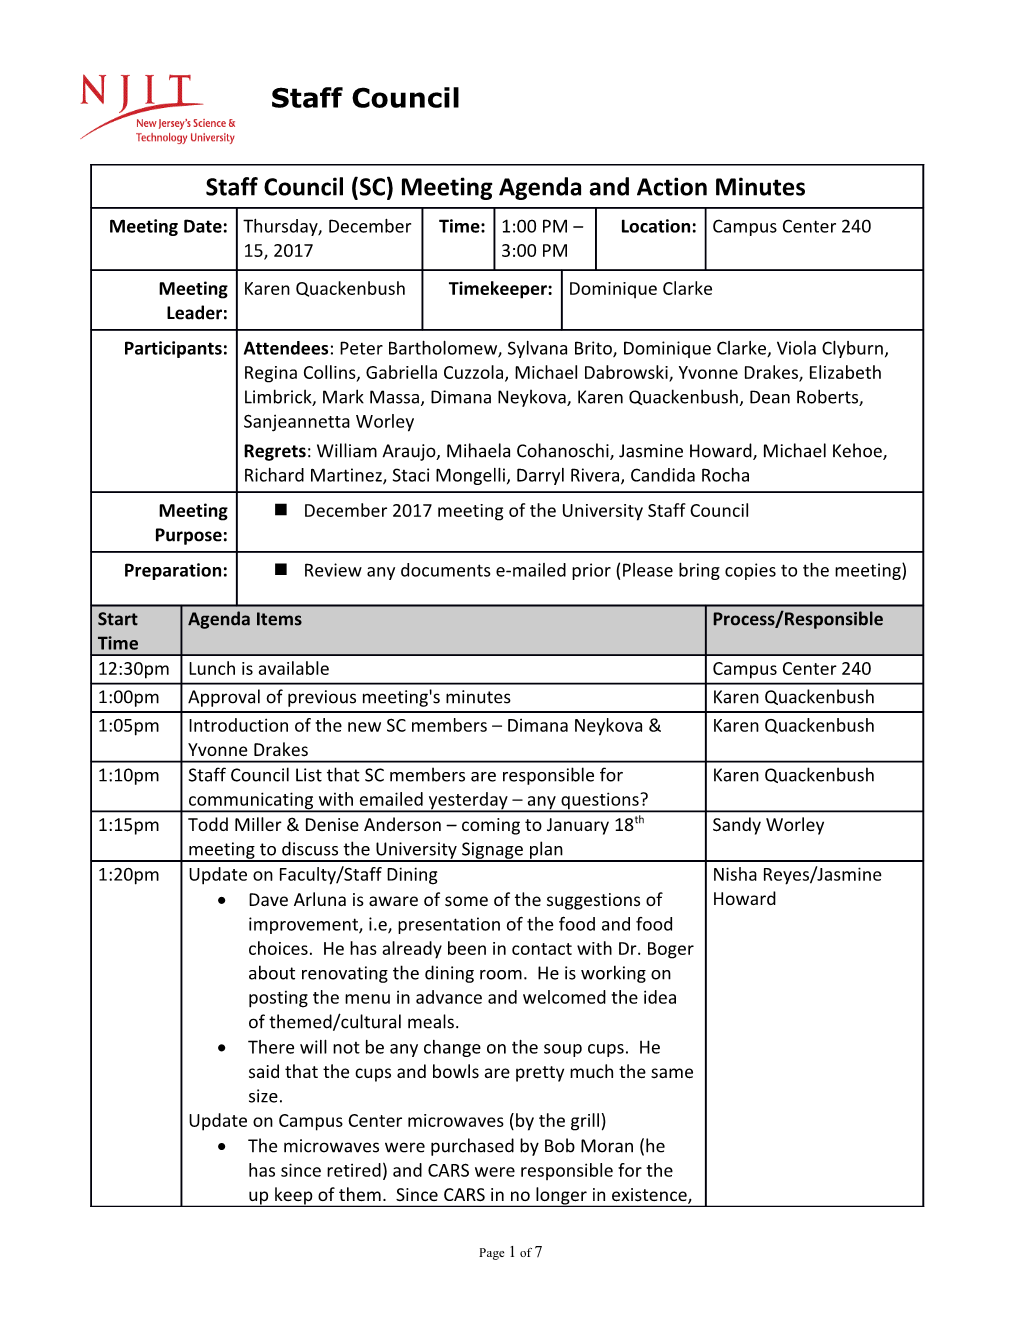 Staff Council (SC) Meeting Agenda and Action Minutes